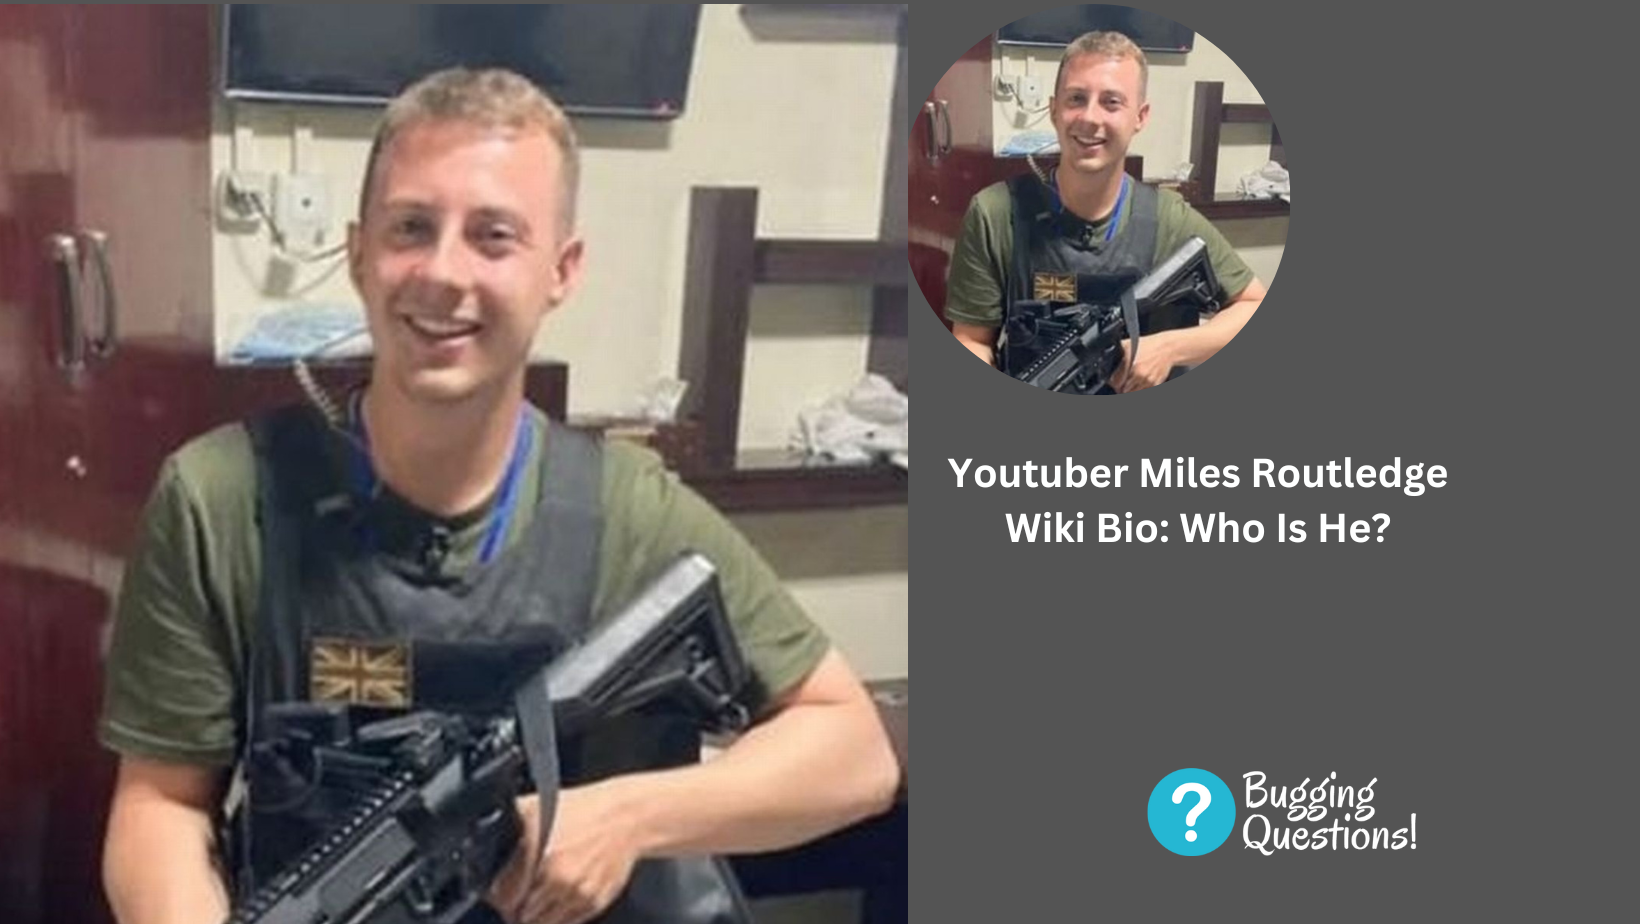 Youtuber Miles Routledge Wiki Bio: Who Is He?